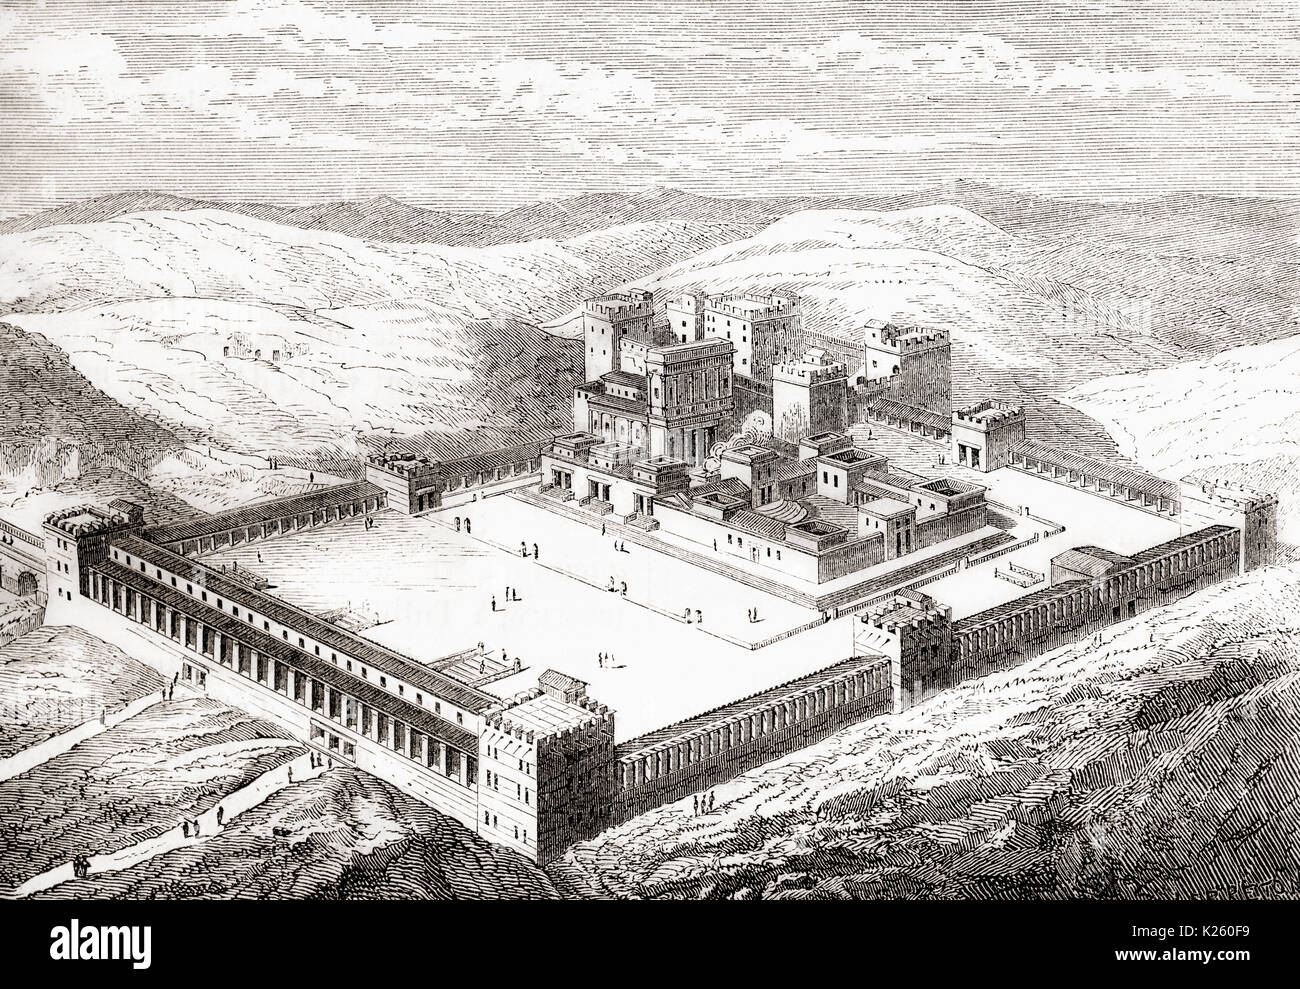 Artist's impression of the restored Second Temple which replaced Solomon's Temple, Jerusalem.  From Les Merveilles de la Science, published 1870. Stock Photo